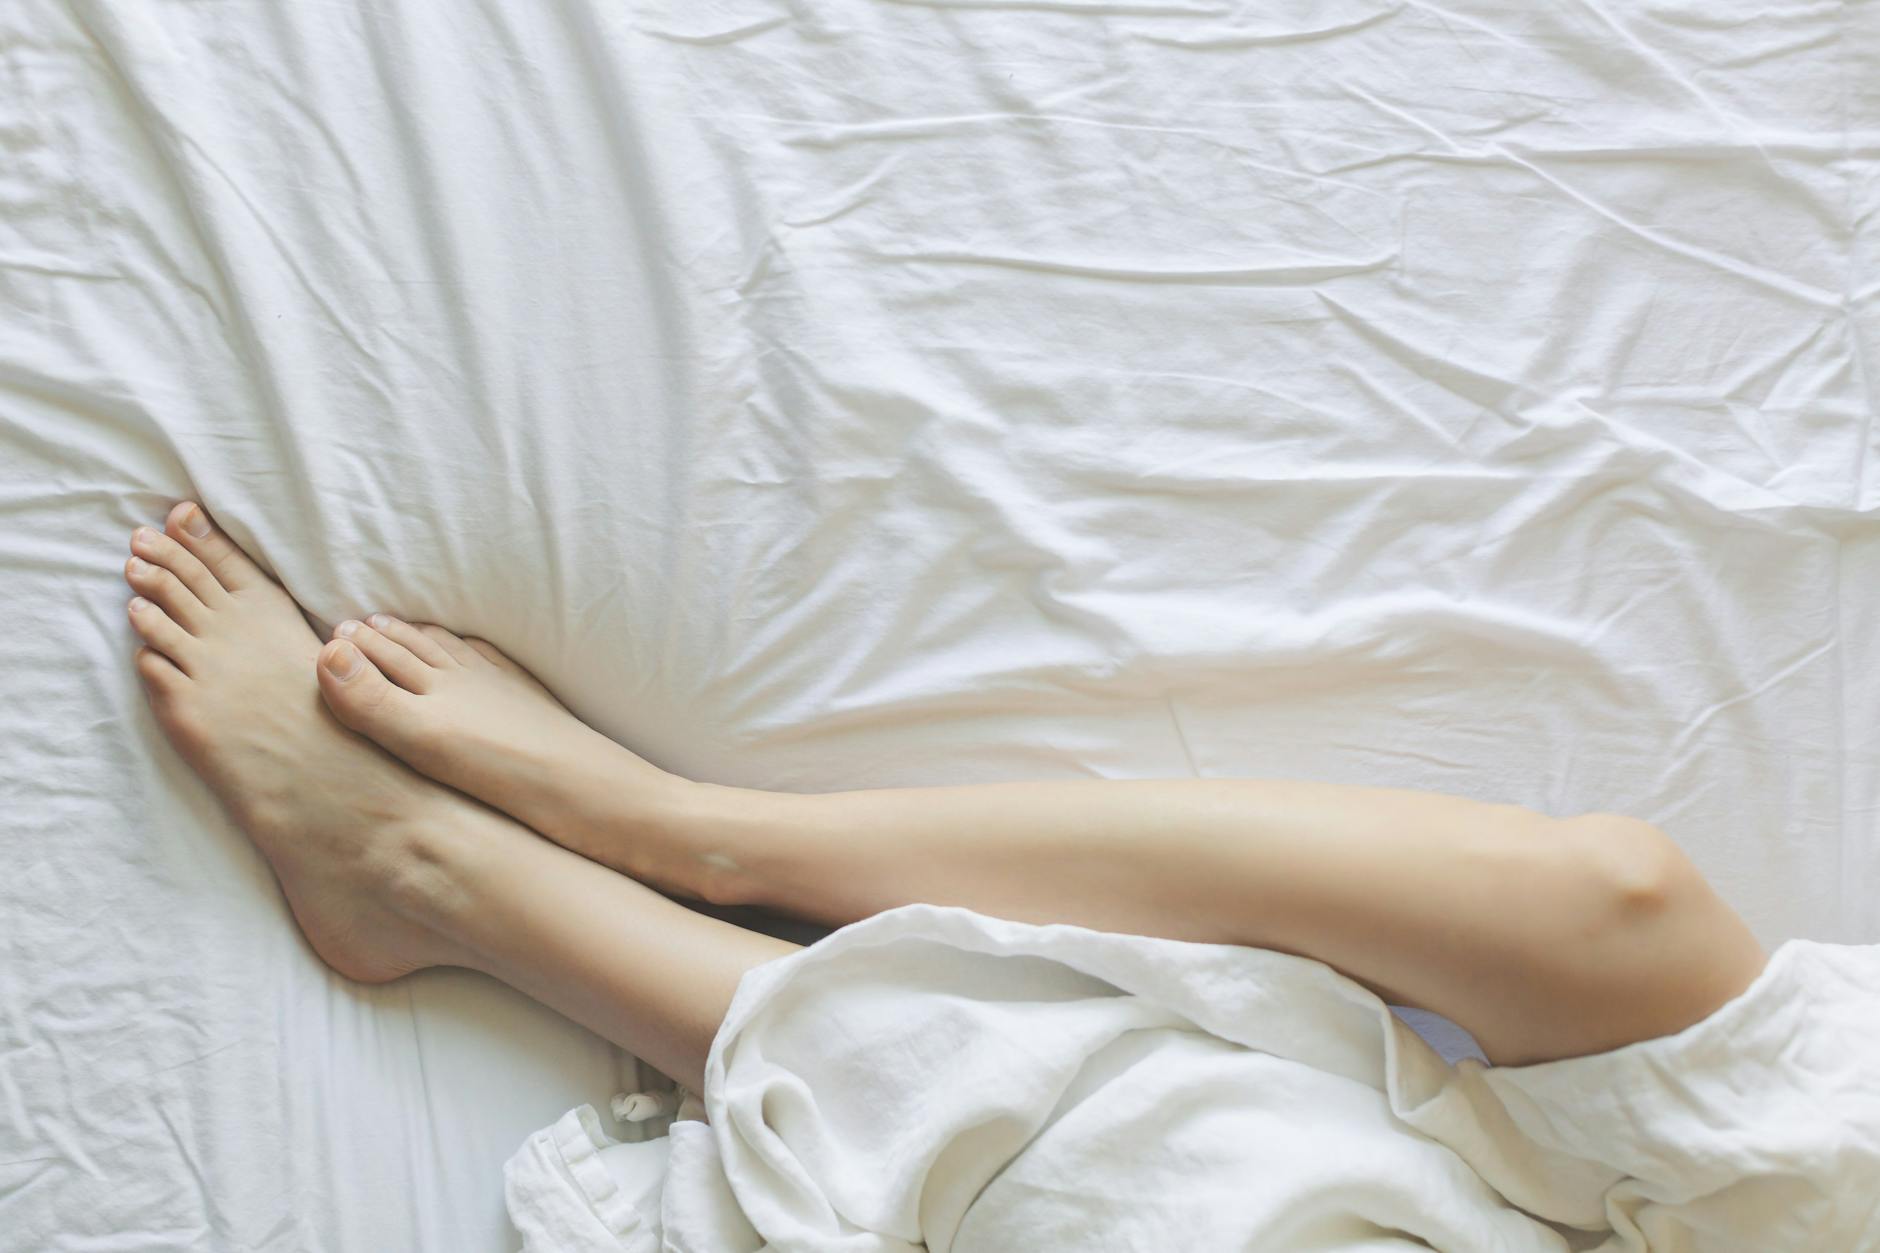 Girl on afloat bed with white sheets